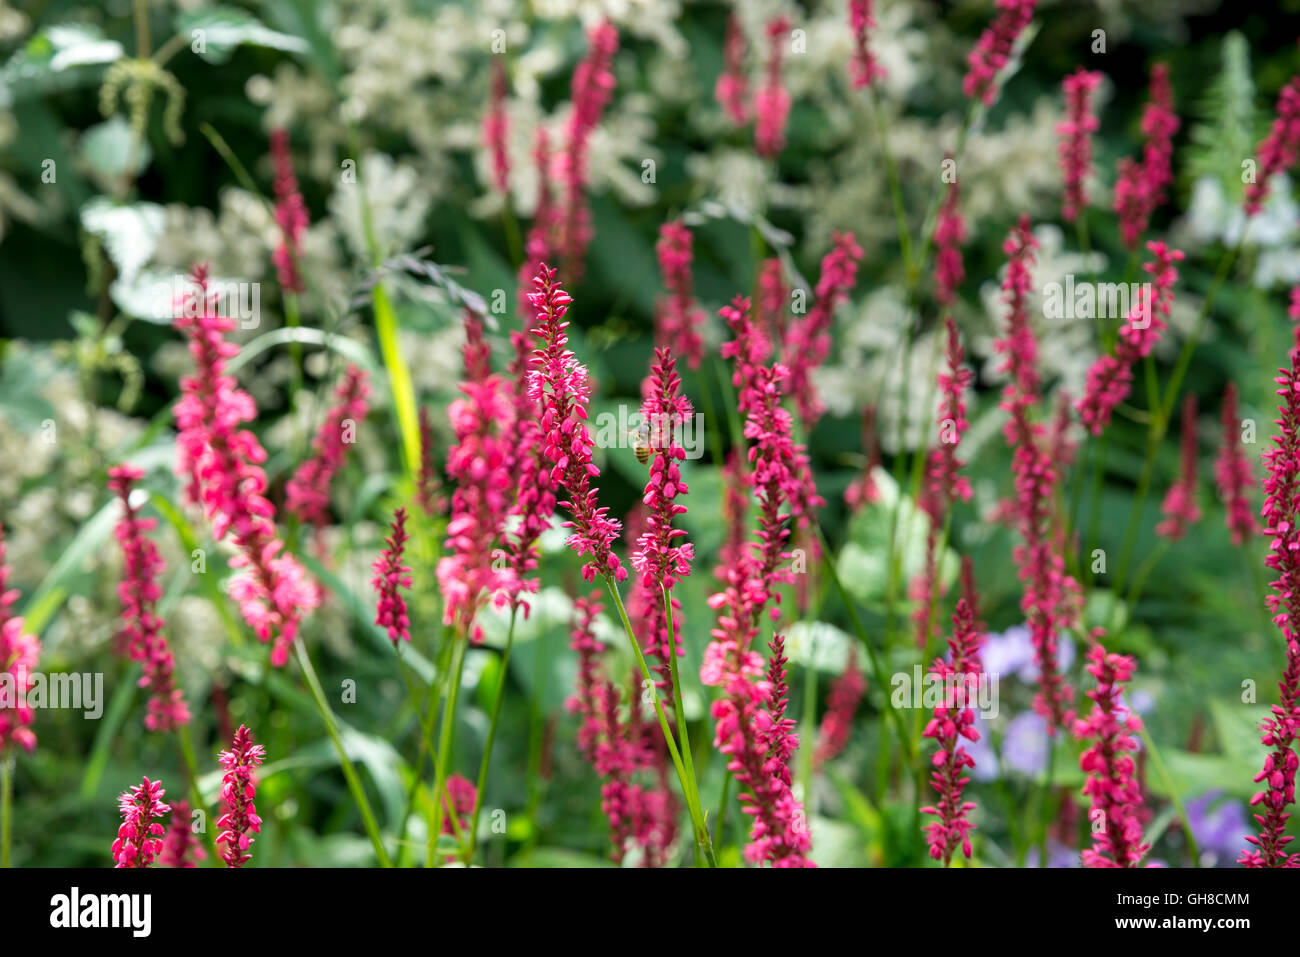 Persicaria amplexicaulis 'atrosanguinea' also known as red Bistort, flowering in a summer flower border. Stock Photo